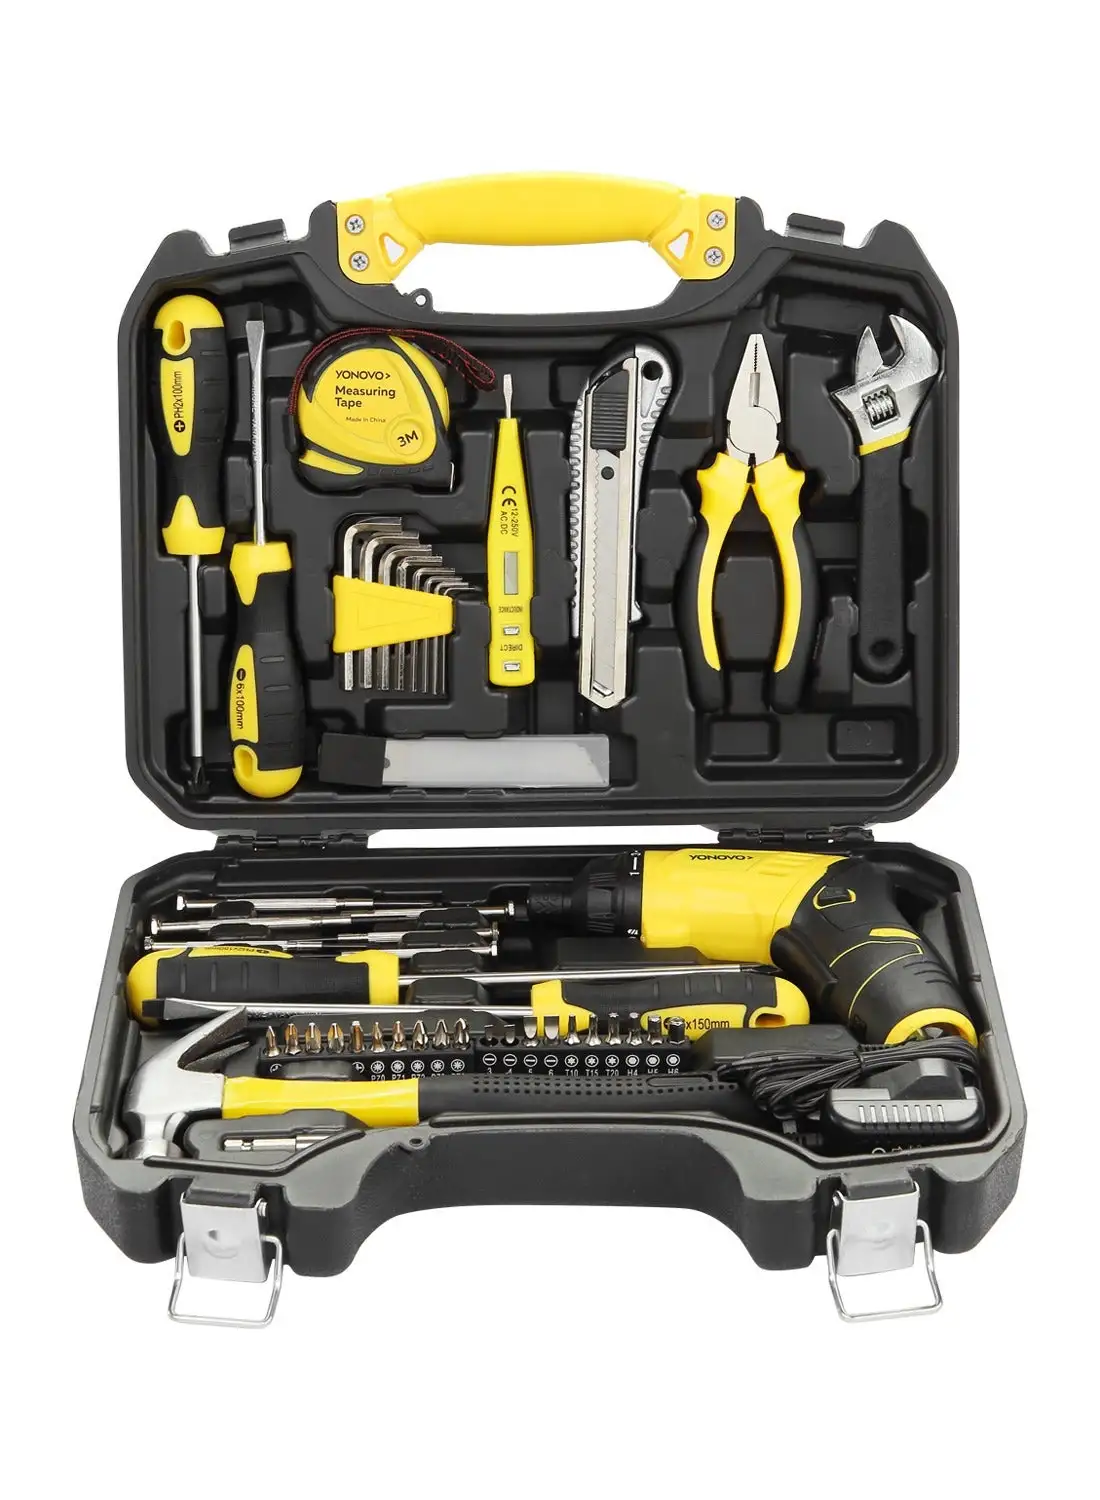 Yonovo 58-Piece Tool Set with Professional Cordless Screwdriver 3.6V Lithium-Ion Battery